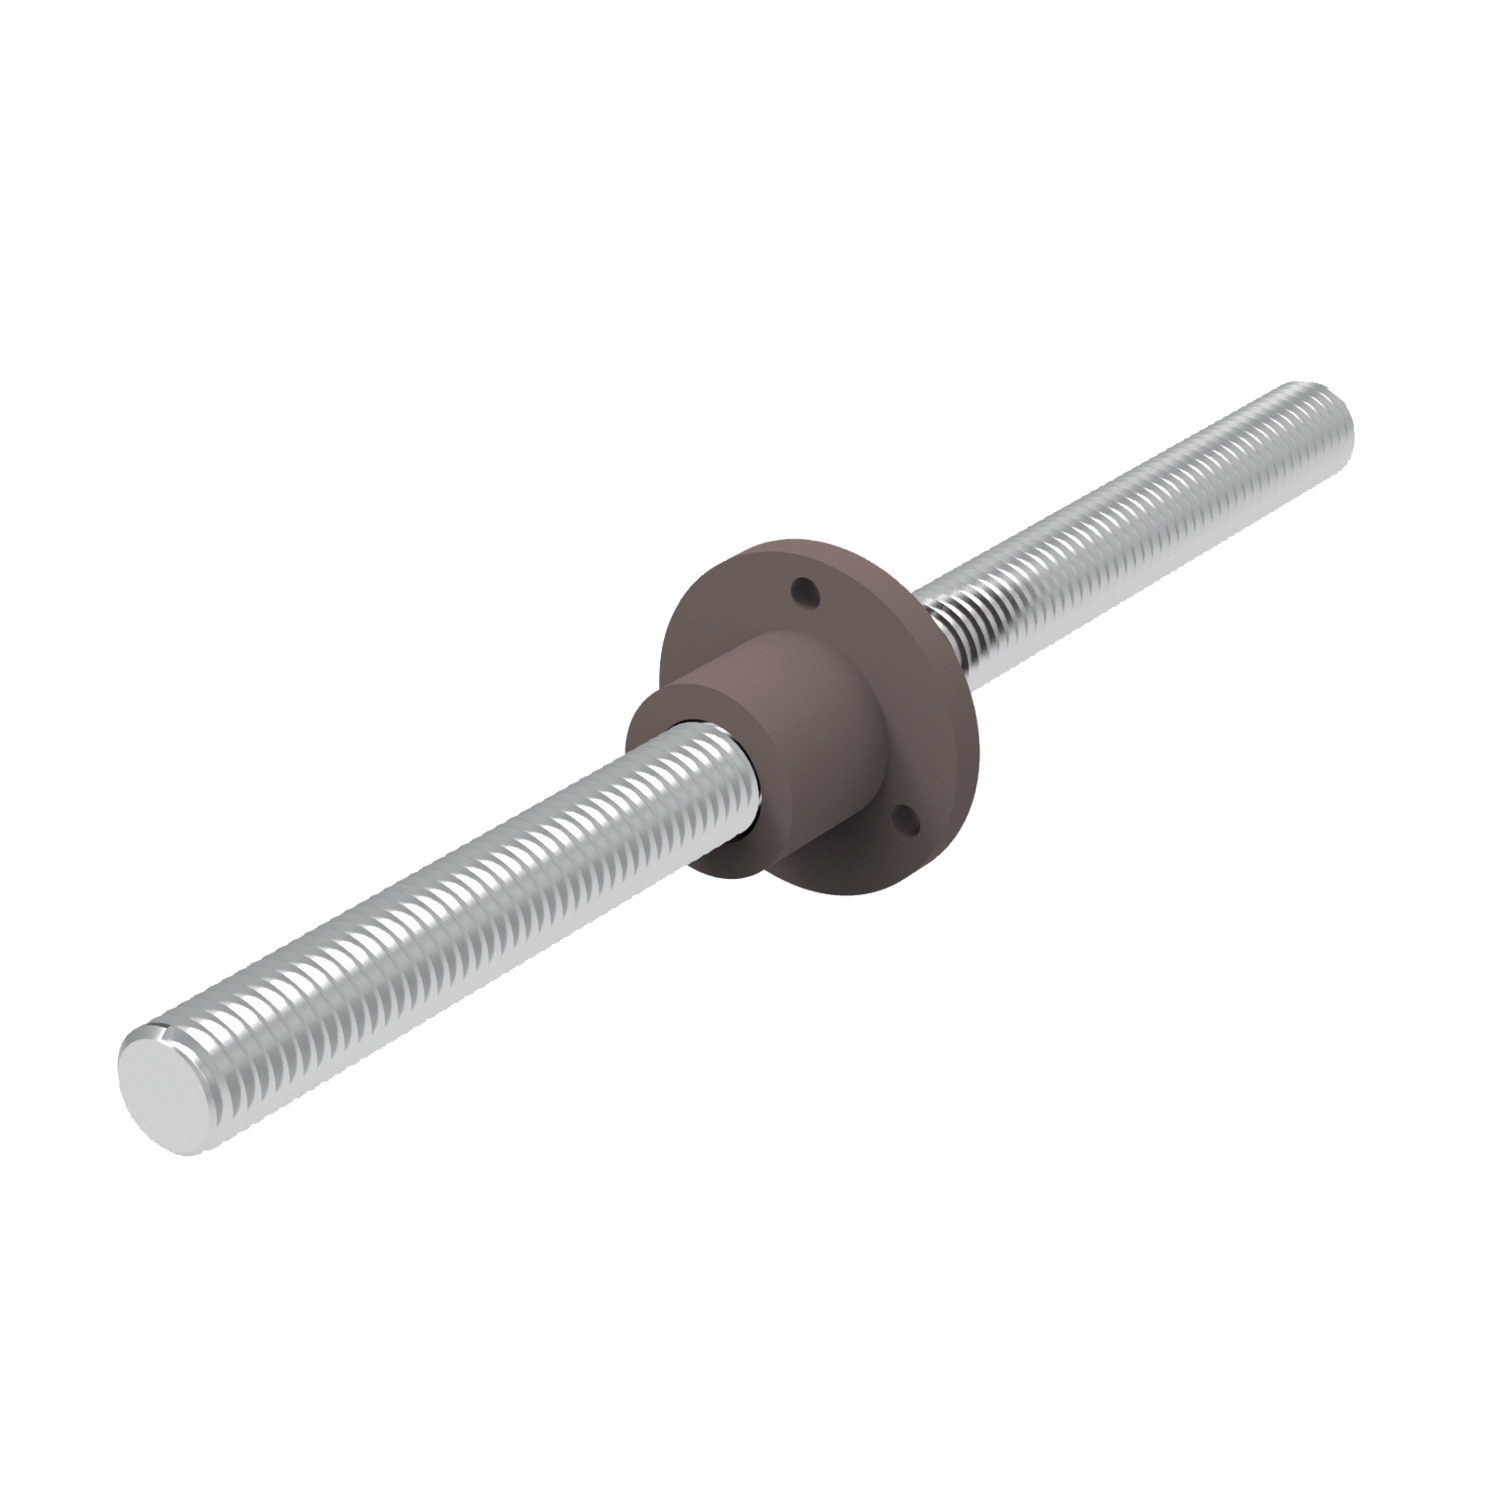 Anti-backlash High Helix Lead Screws Stainless steel (AISI/SUS grade 304; A2) with resin nuts. High helix style designed for minimal backlash.